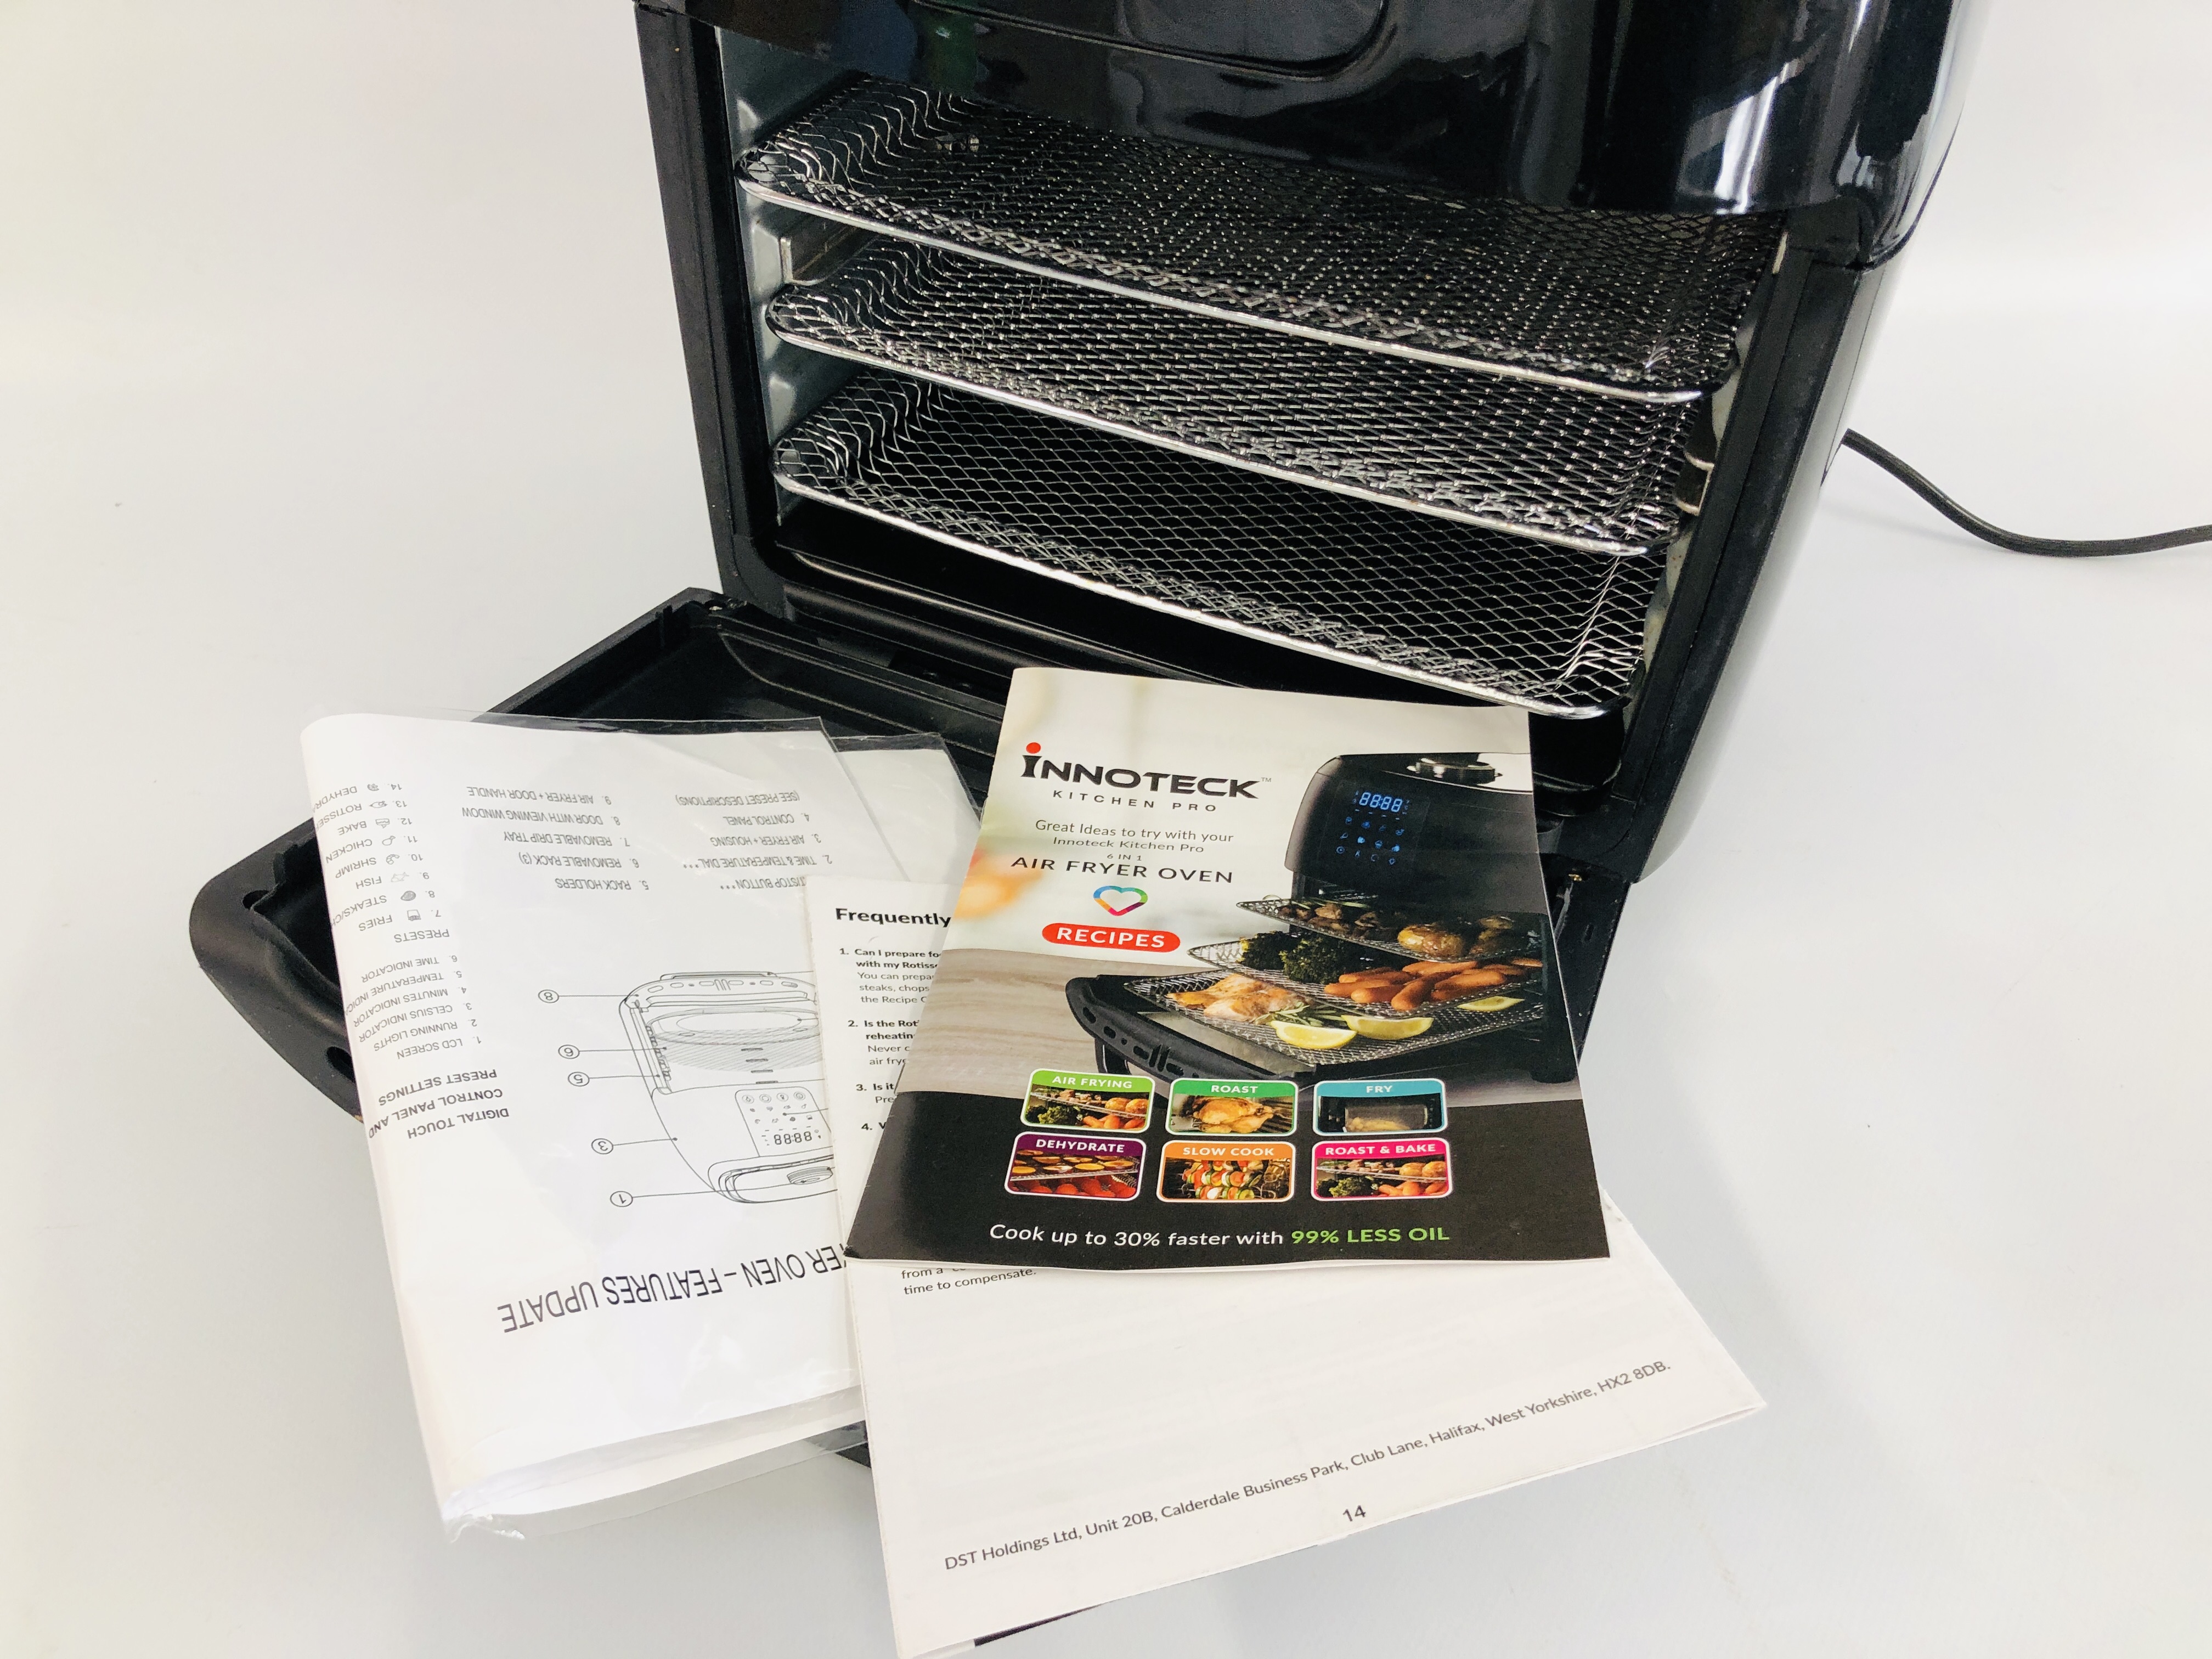 A INNOTECK KITCHEN PRO DS-5894 6 IN 1 AIR FRYER OVEN - SOLD AS SEEN. - Image 2 of 2